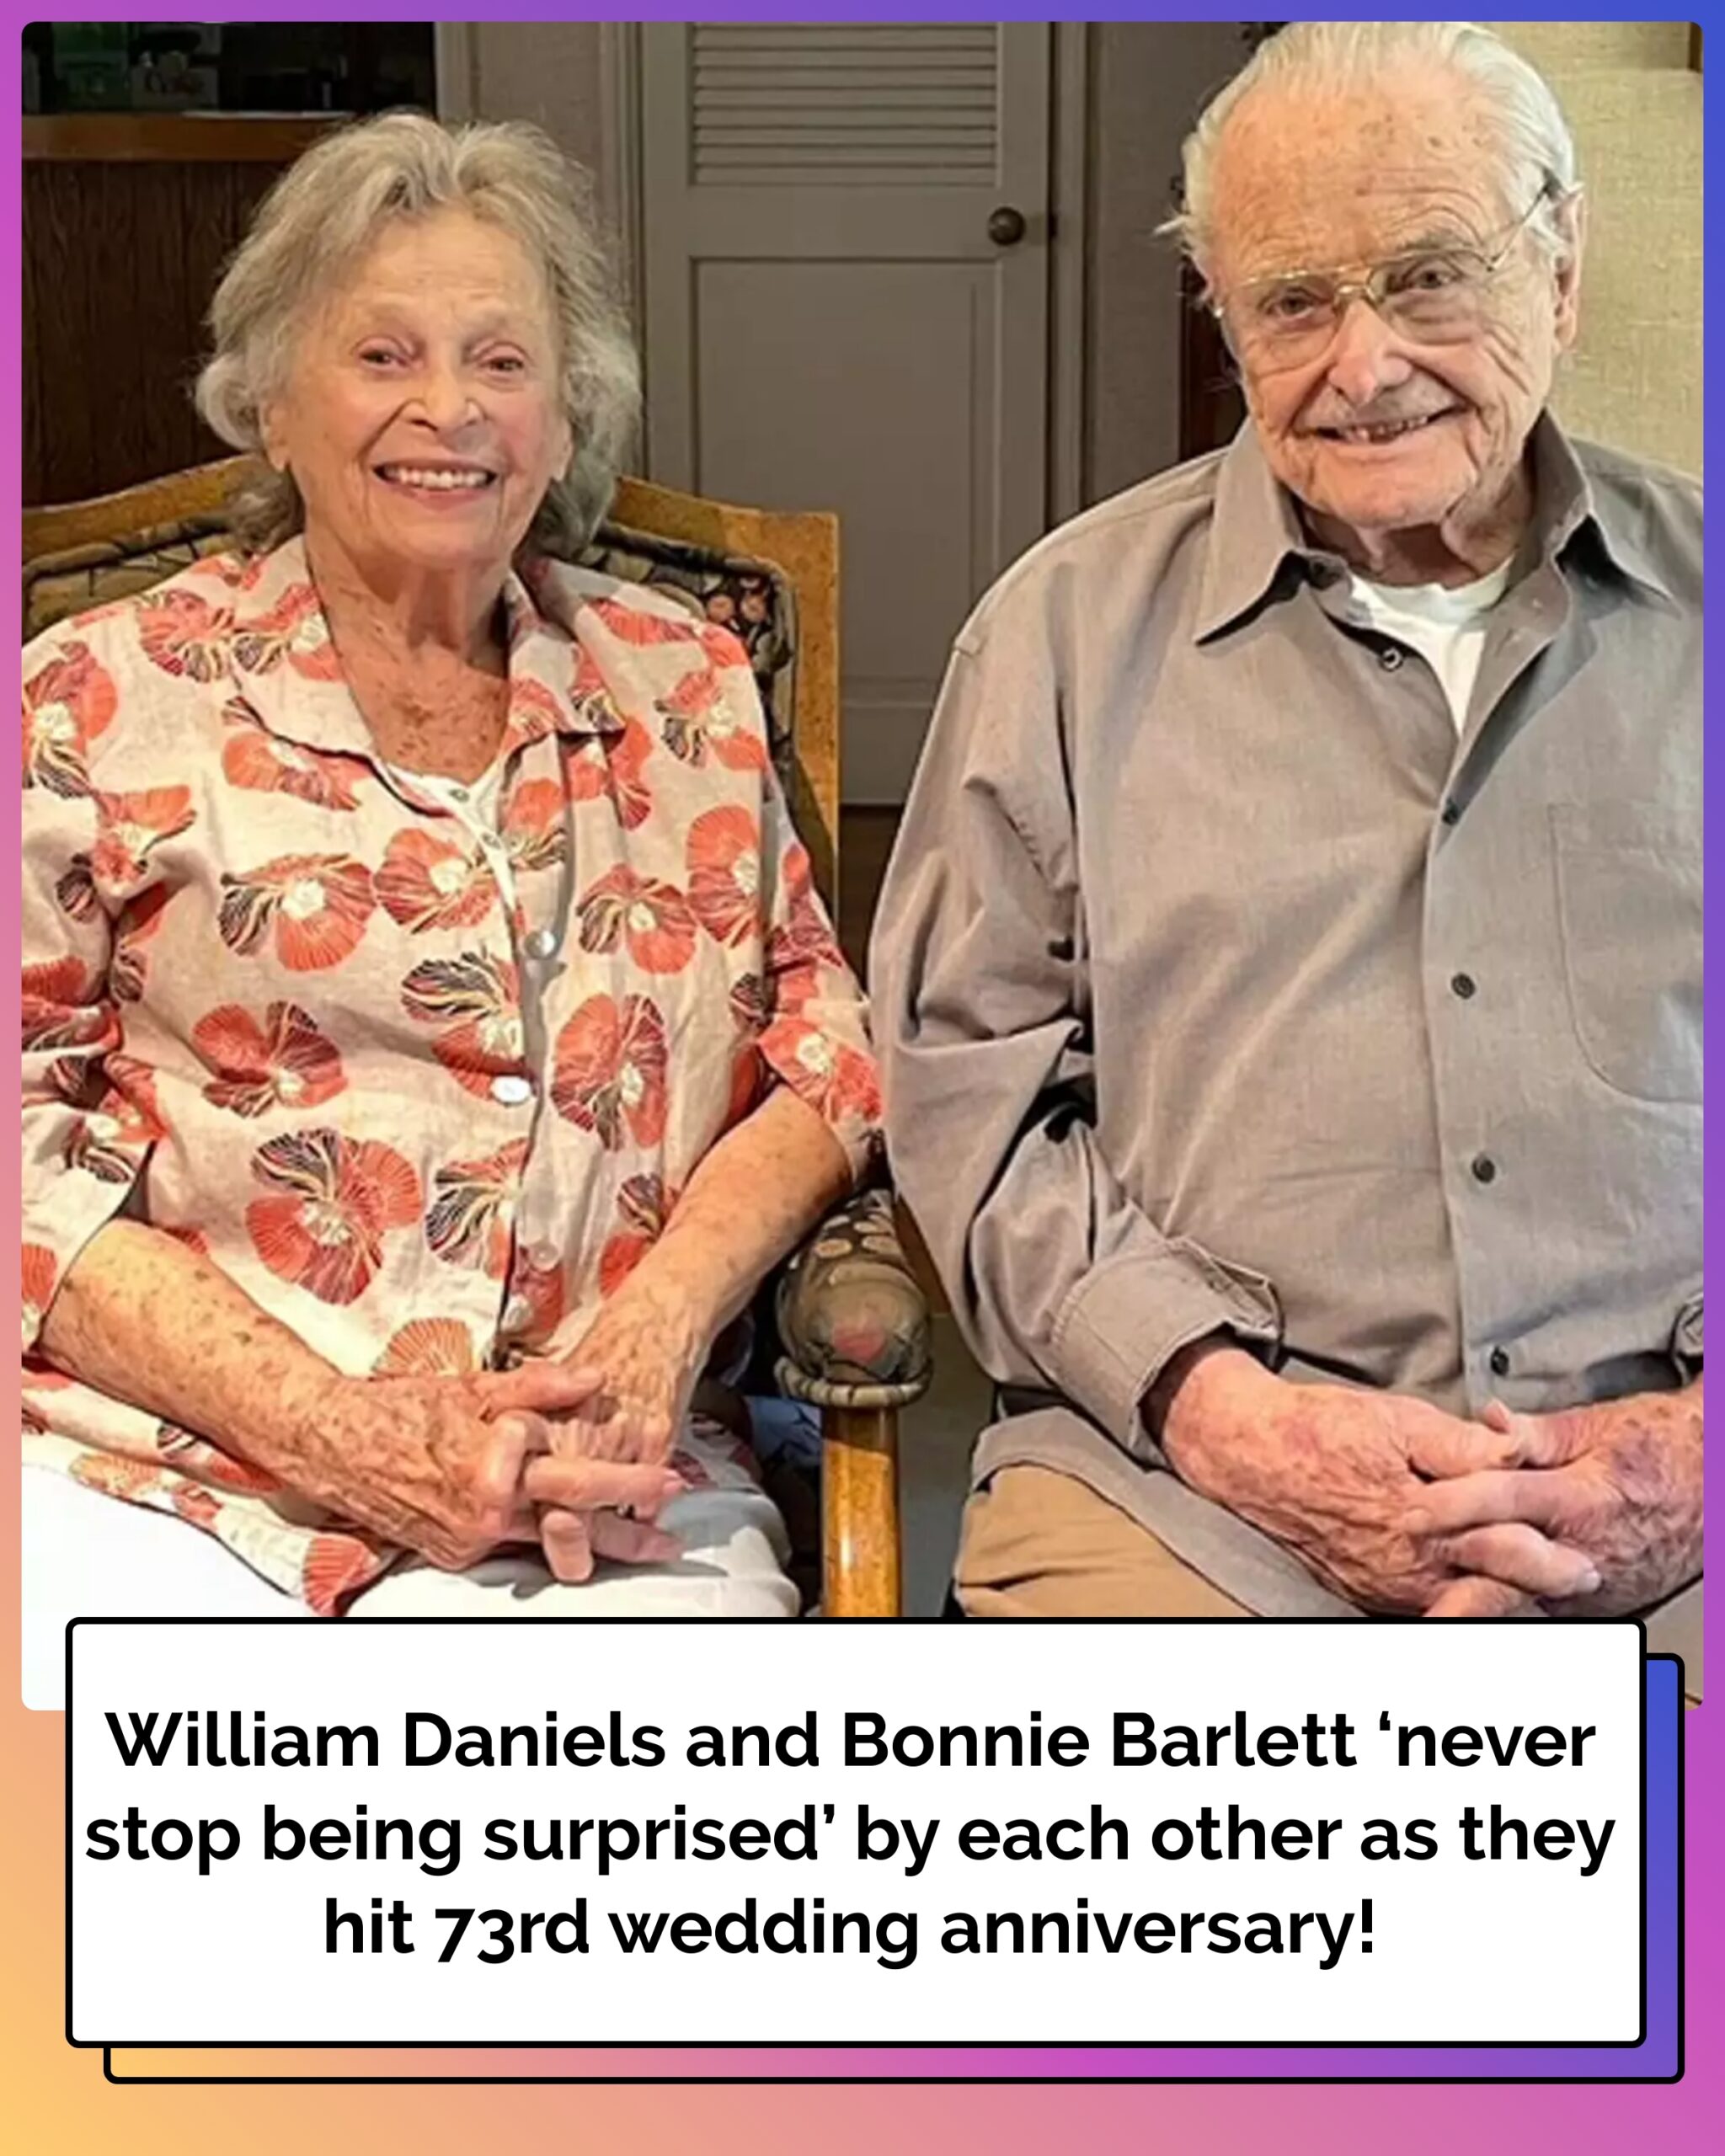 William Daniels and Bonnie Bartlett ‘Never Stop Being Surprised’ by Each Other as They Hit 73rd Wedding Anniversary